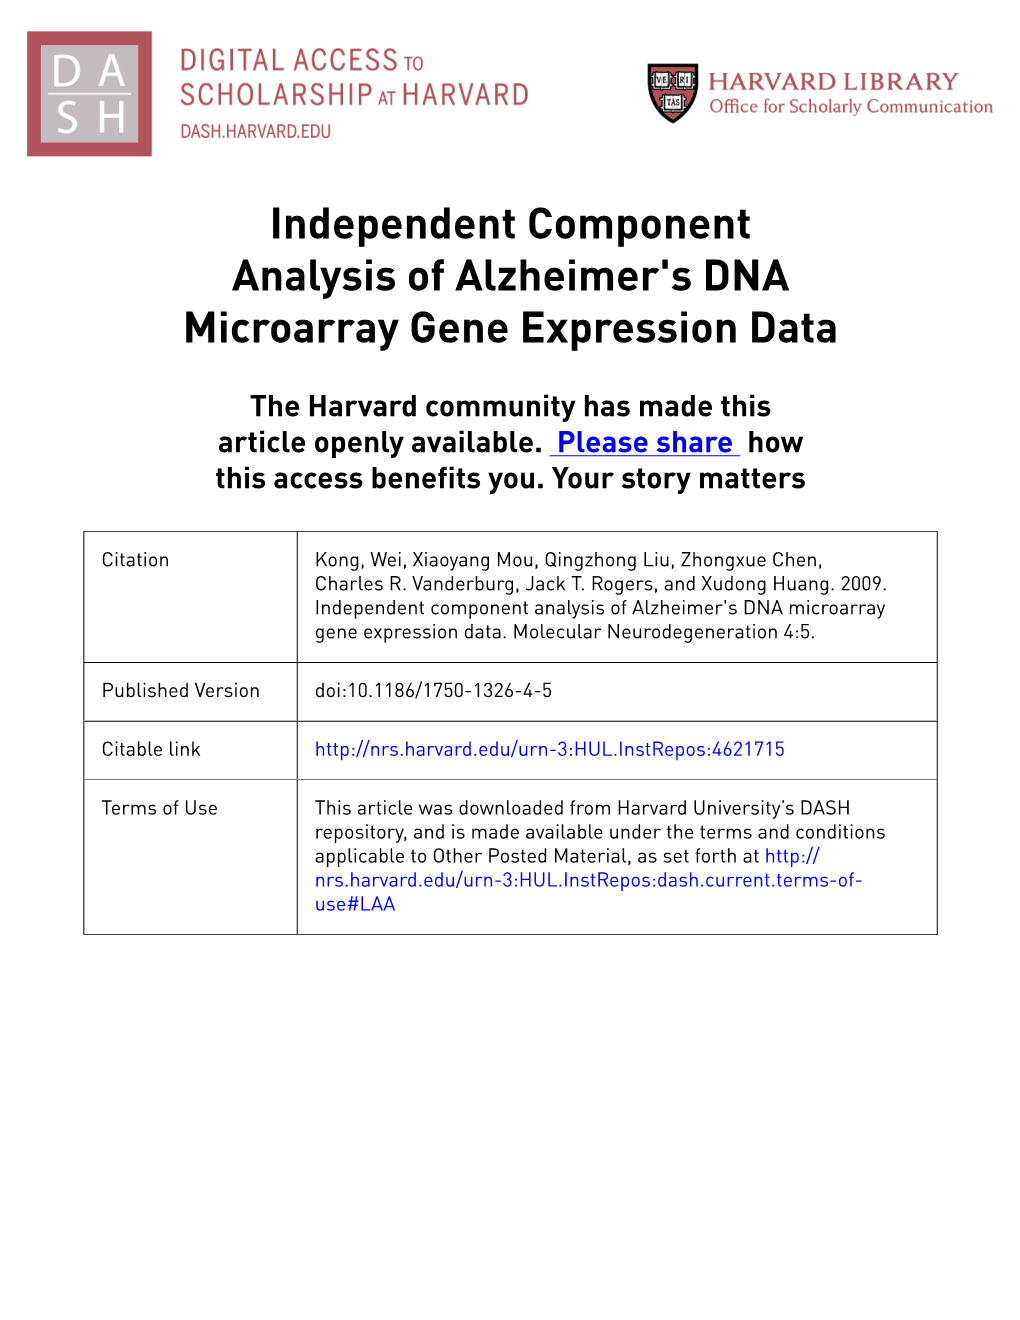 Independent Component Analysis of Alzheimer's DNA Microarray Gene Expression Data